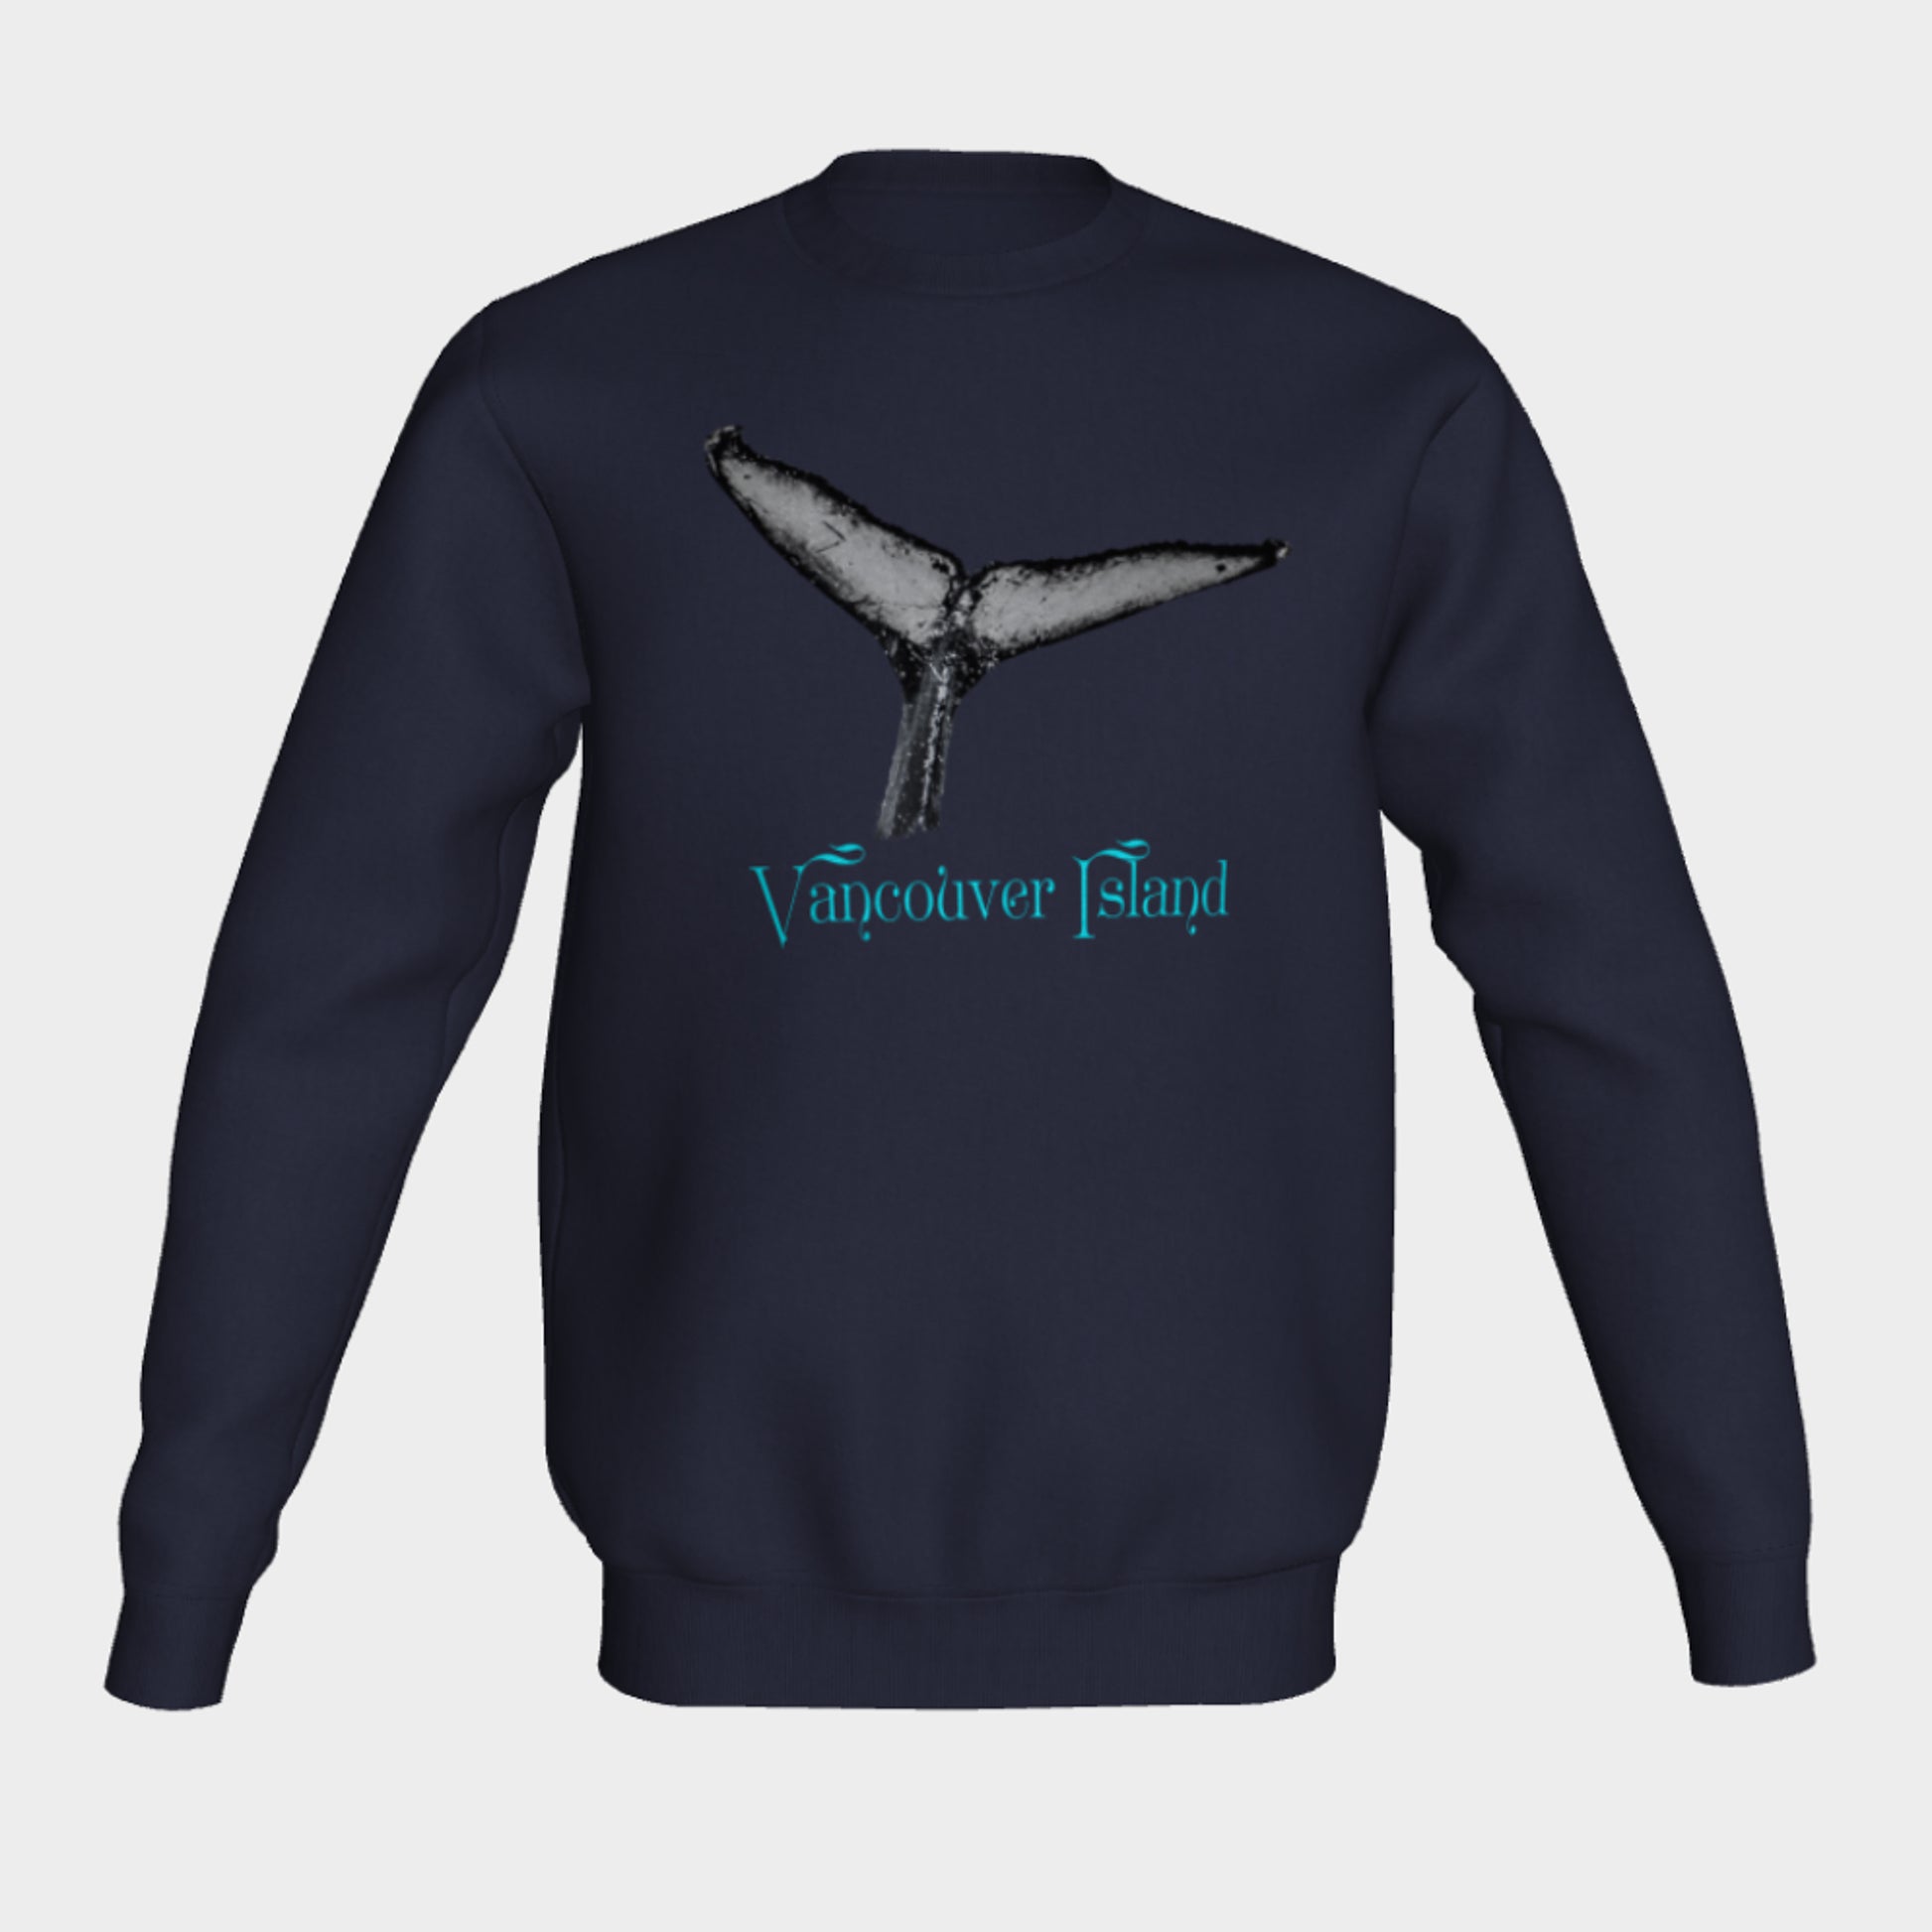 Humpback Whale Tail Vancouver Island Unisex Crewneck Sweatshirt What’s better than a super cozy sweatshirt? A super cozy sweatshirt from Van Isle Goddess!  Super cozy unisex sweatshirt for those chilly days.  Excellent for men or women.   Fit is roomy and comfortable. 